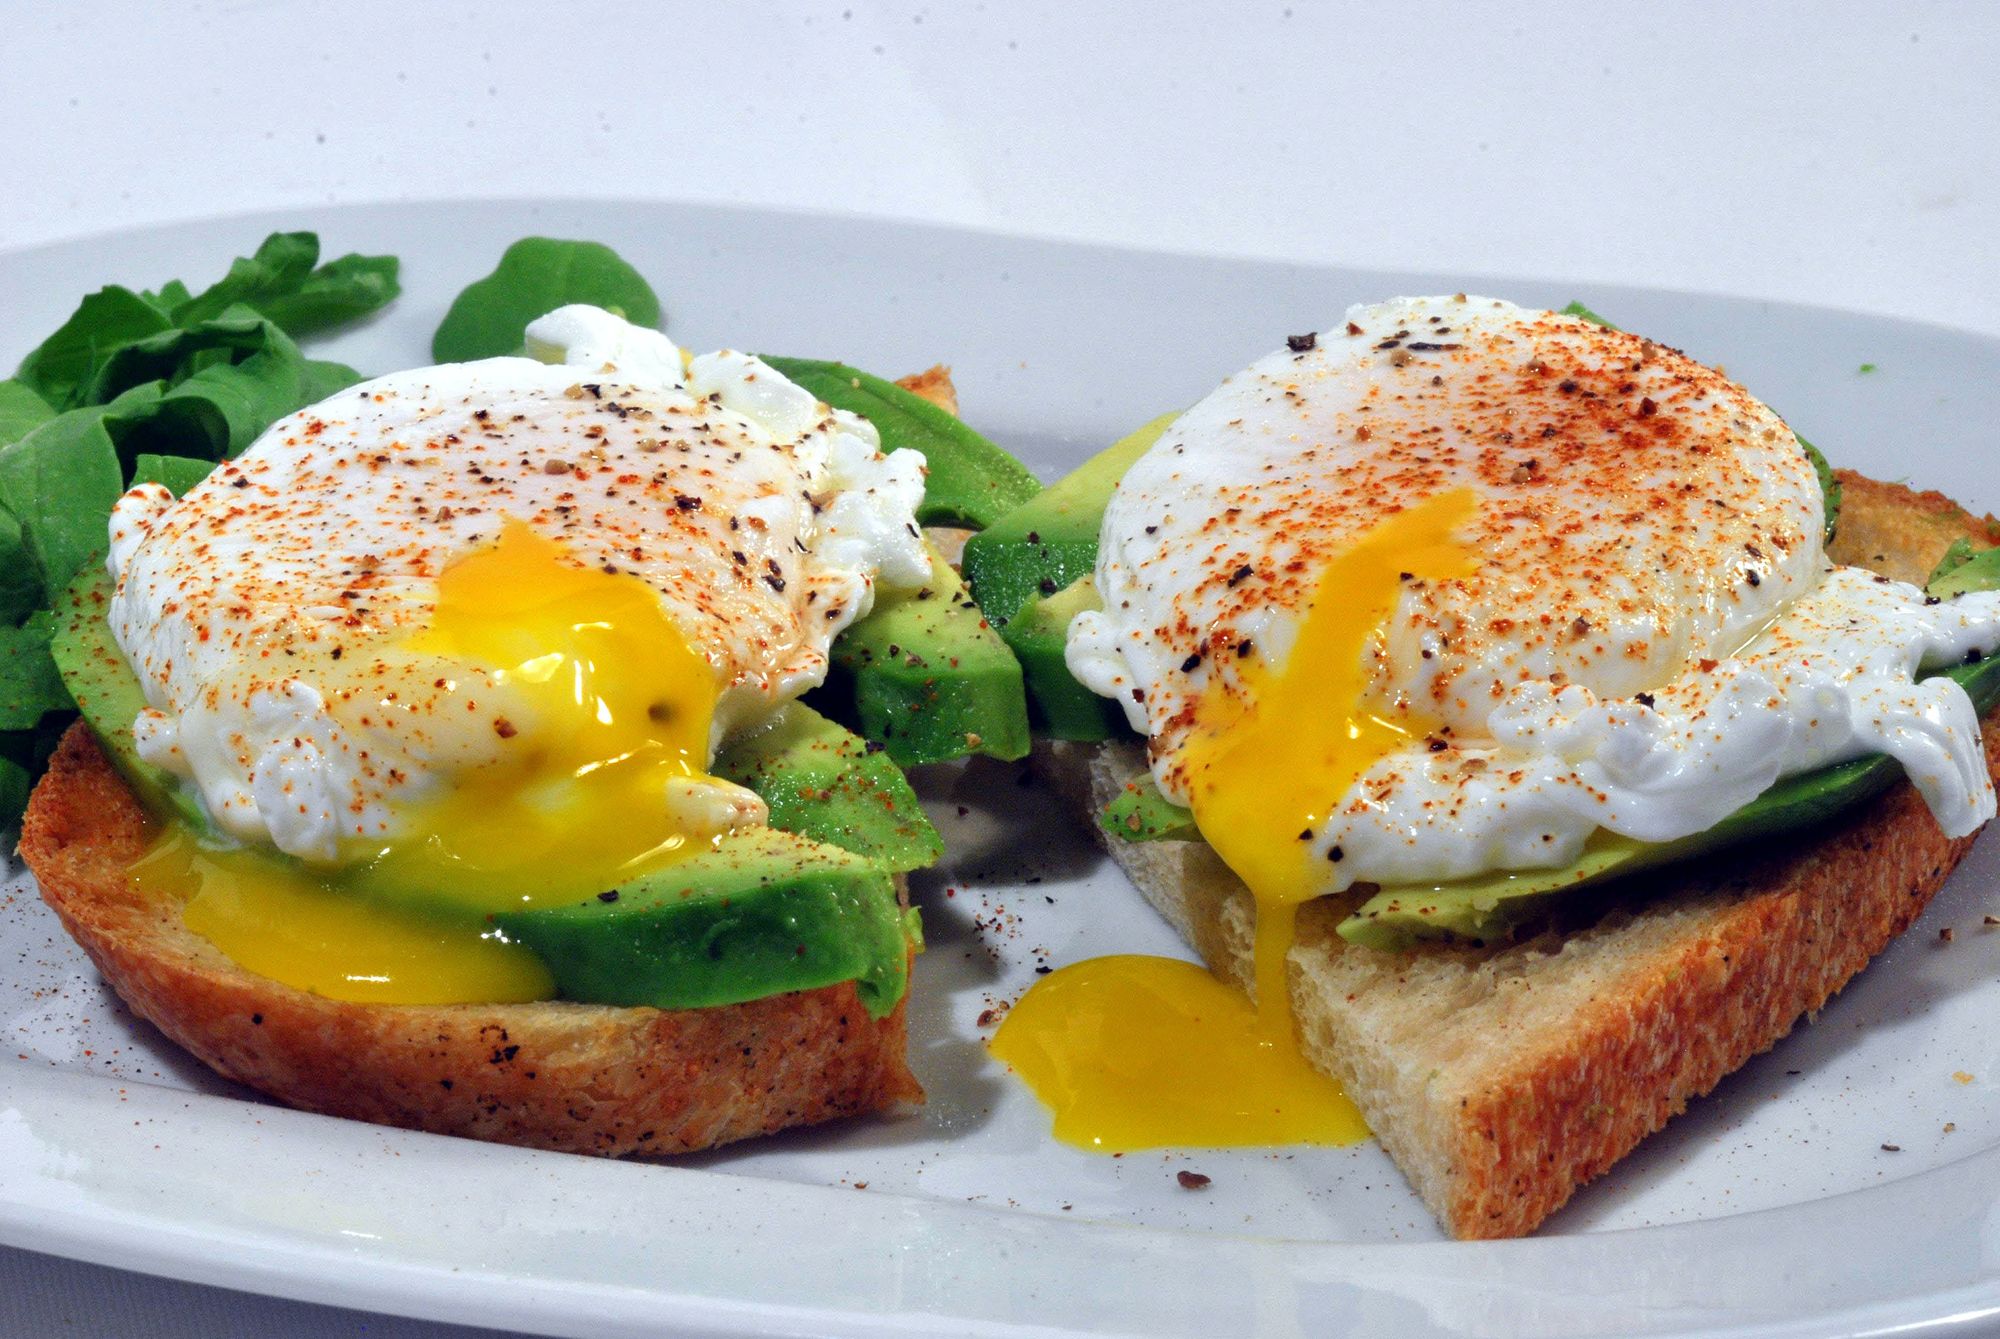 Avocado and poached eggs on toast